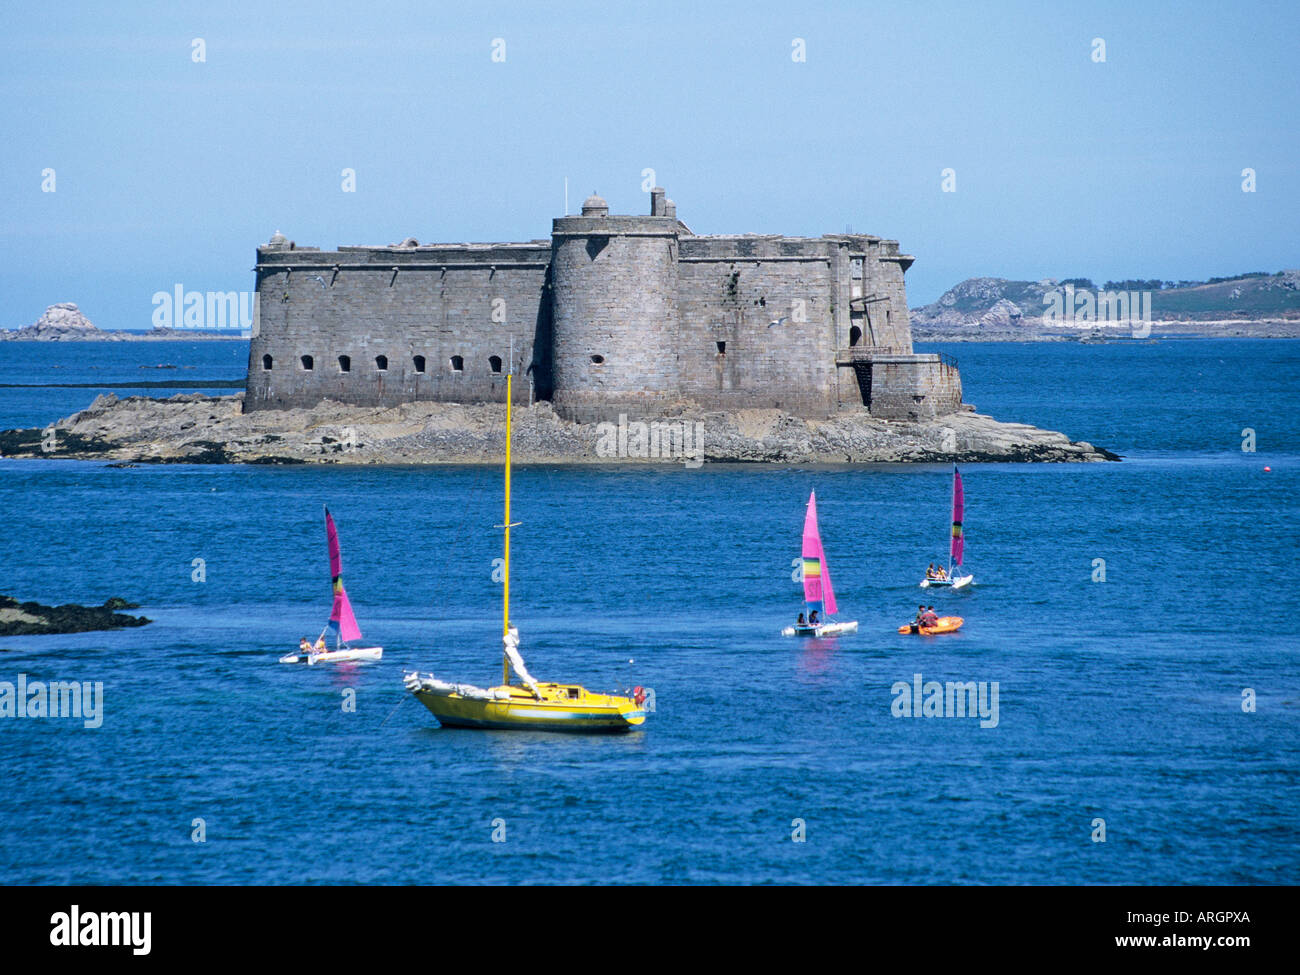 Dinghy sailors enjoy a sail with the added benefit of a close up view of the chateau du Taureau which was built as a fortress in 1552 Stock Photo